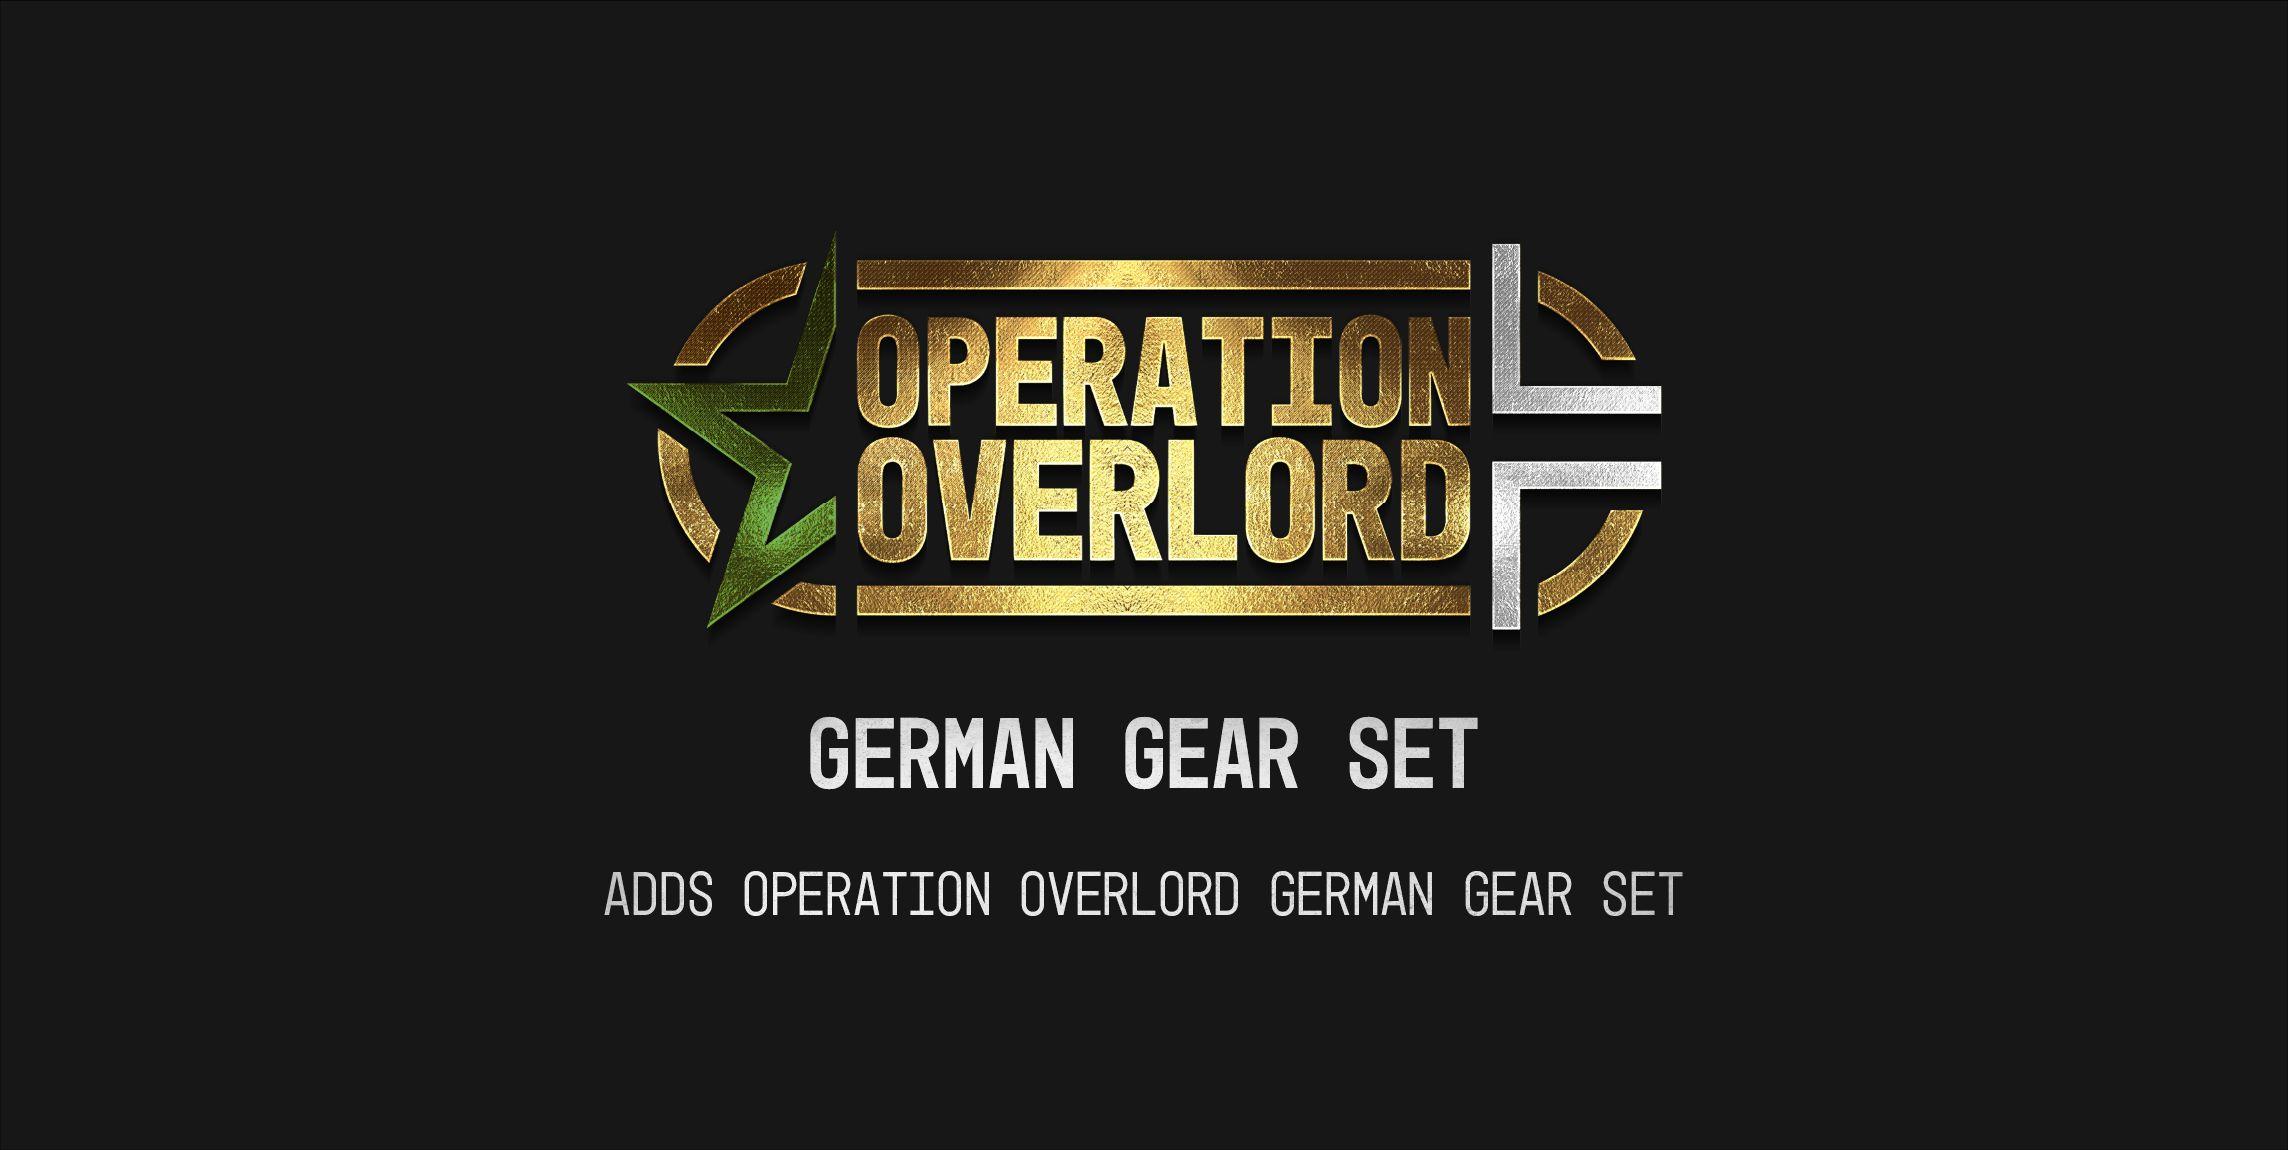 Operation Overlord German Gear